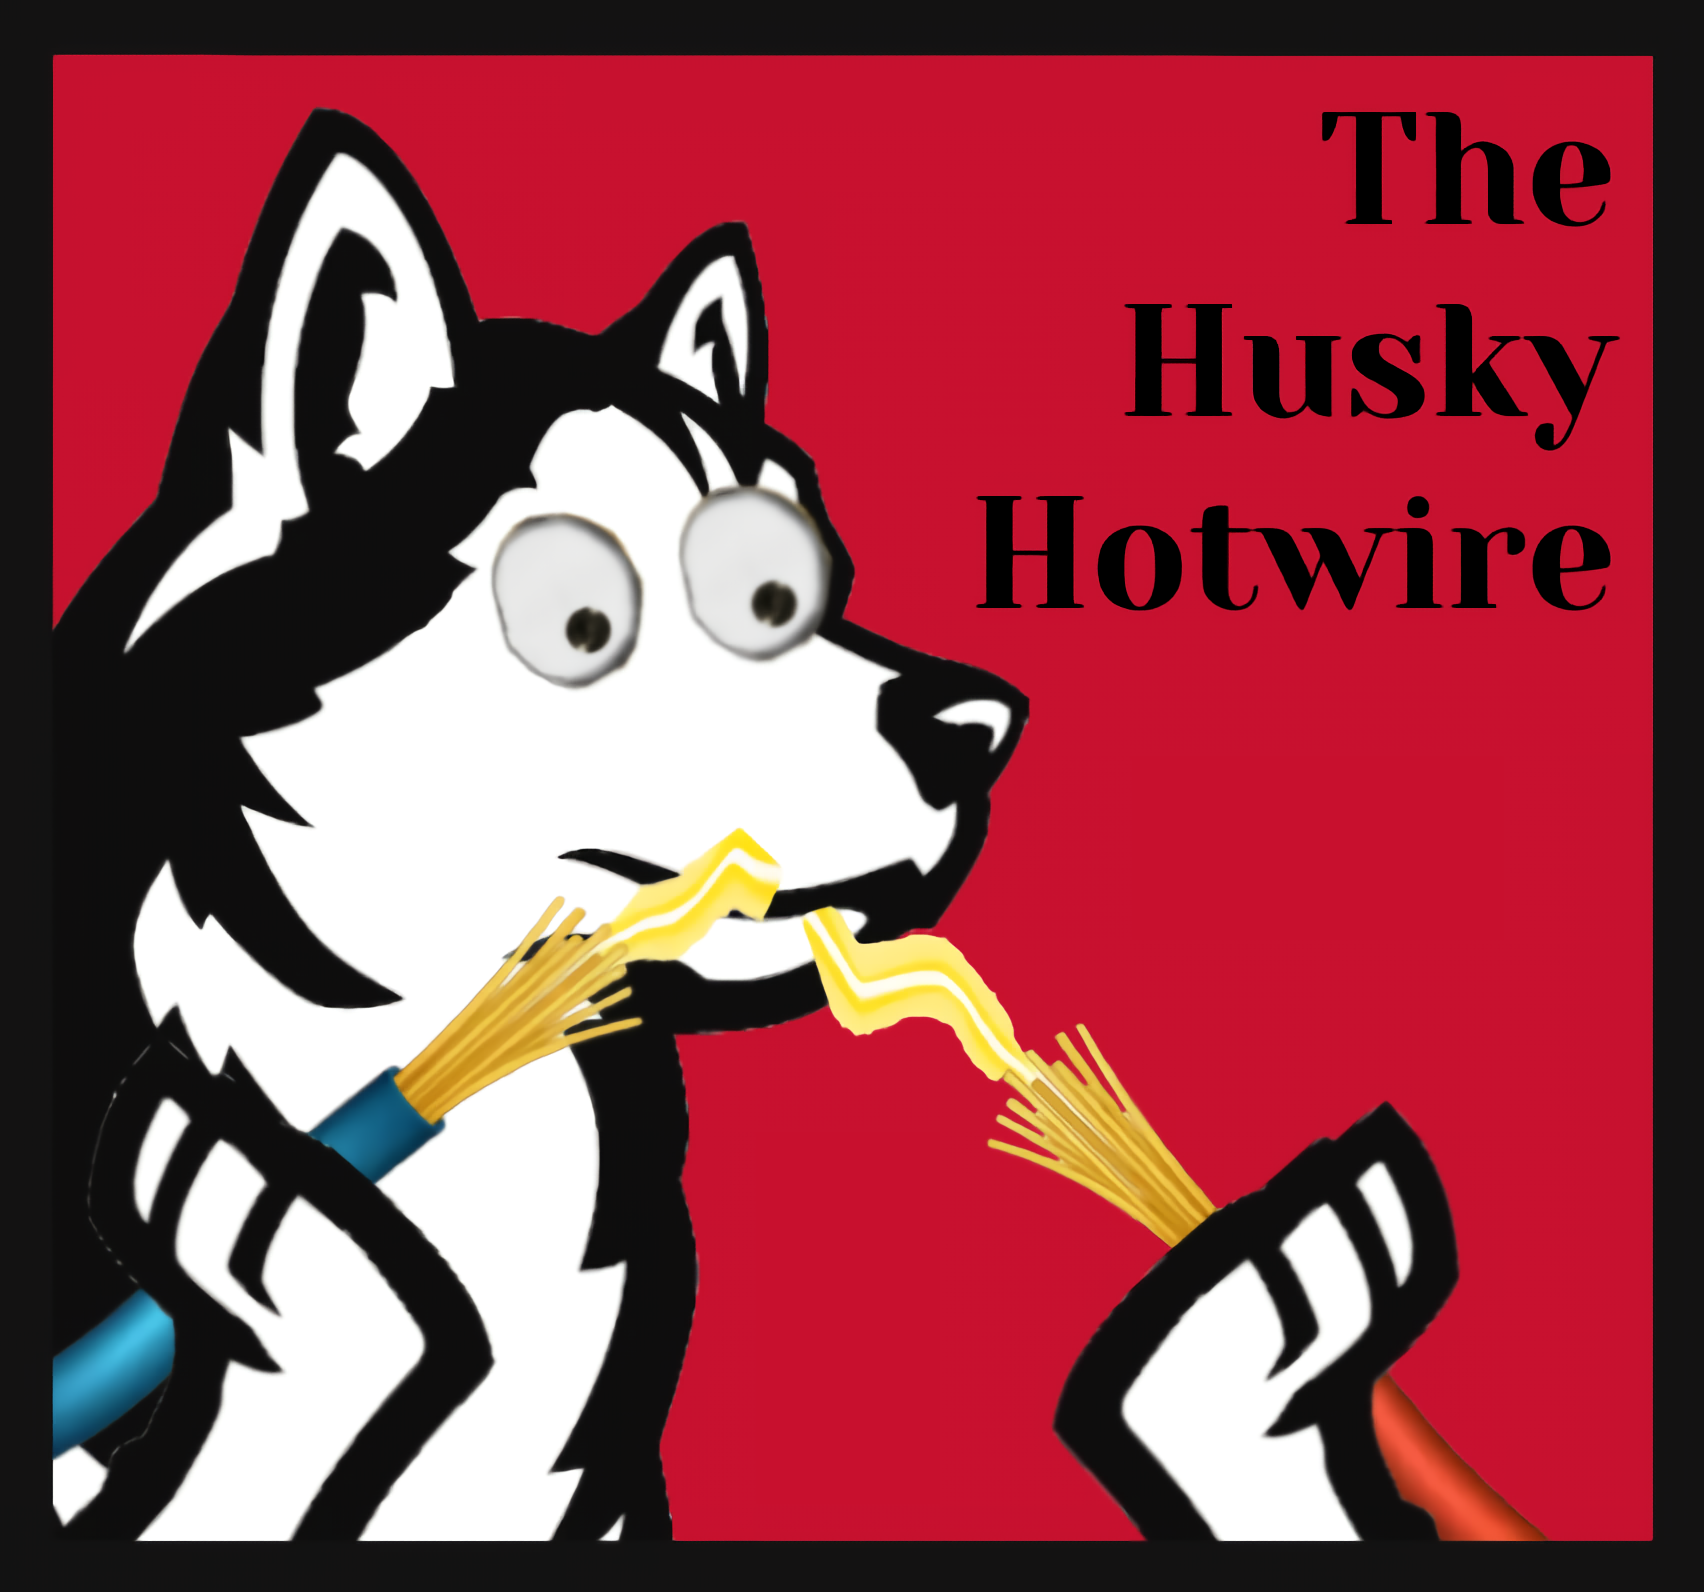 The Husky Hotwire cover